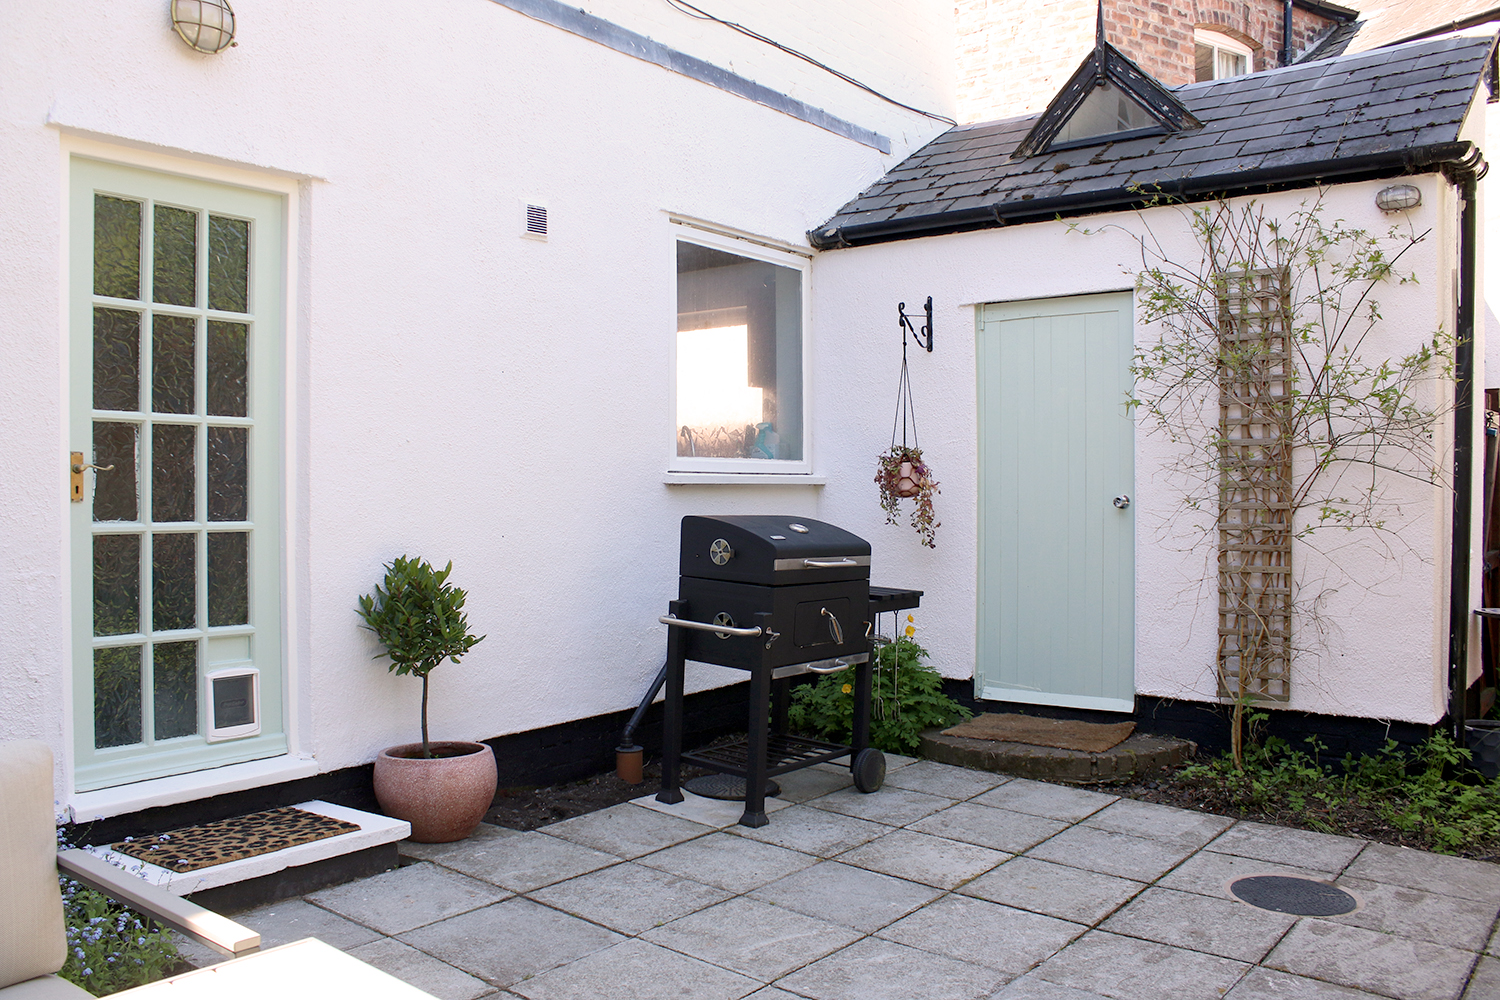 Courtyard garden with pale green and pink accents